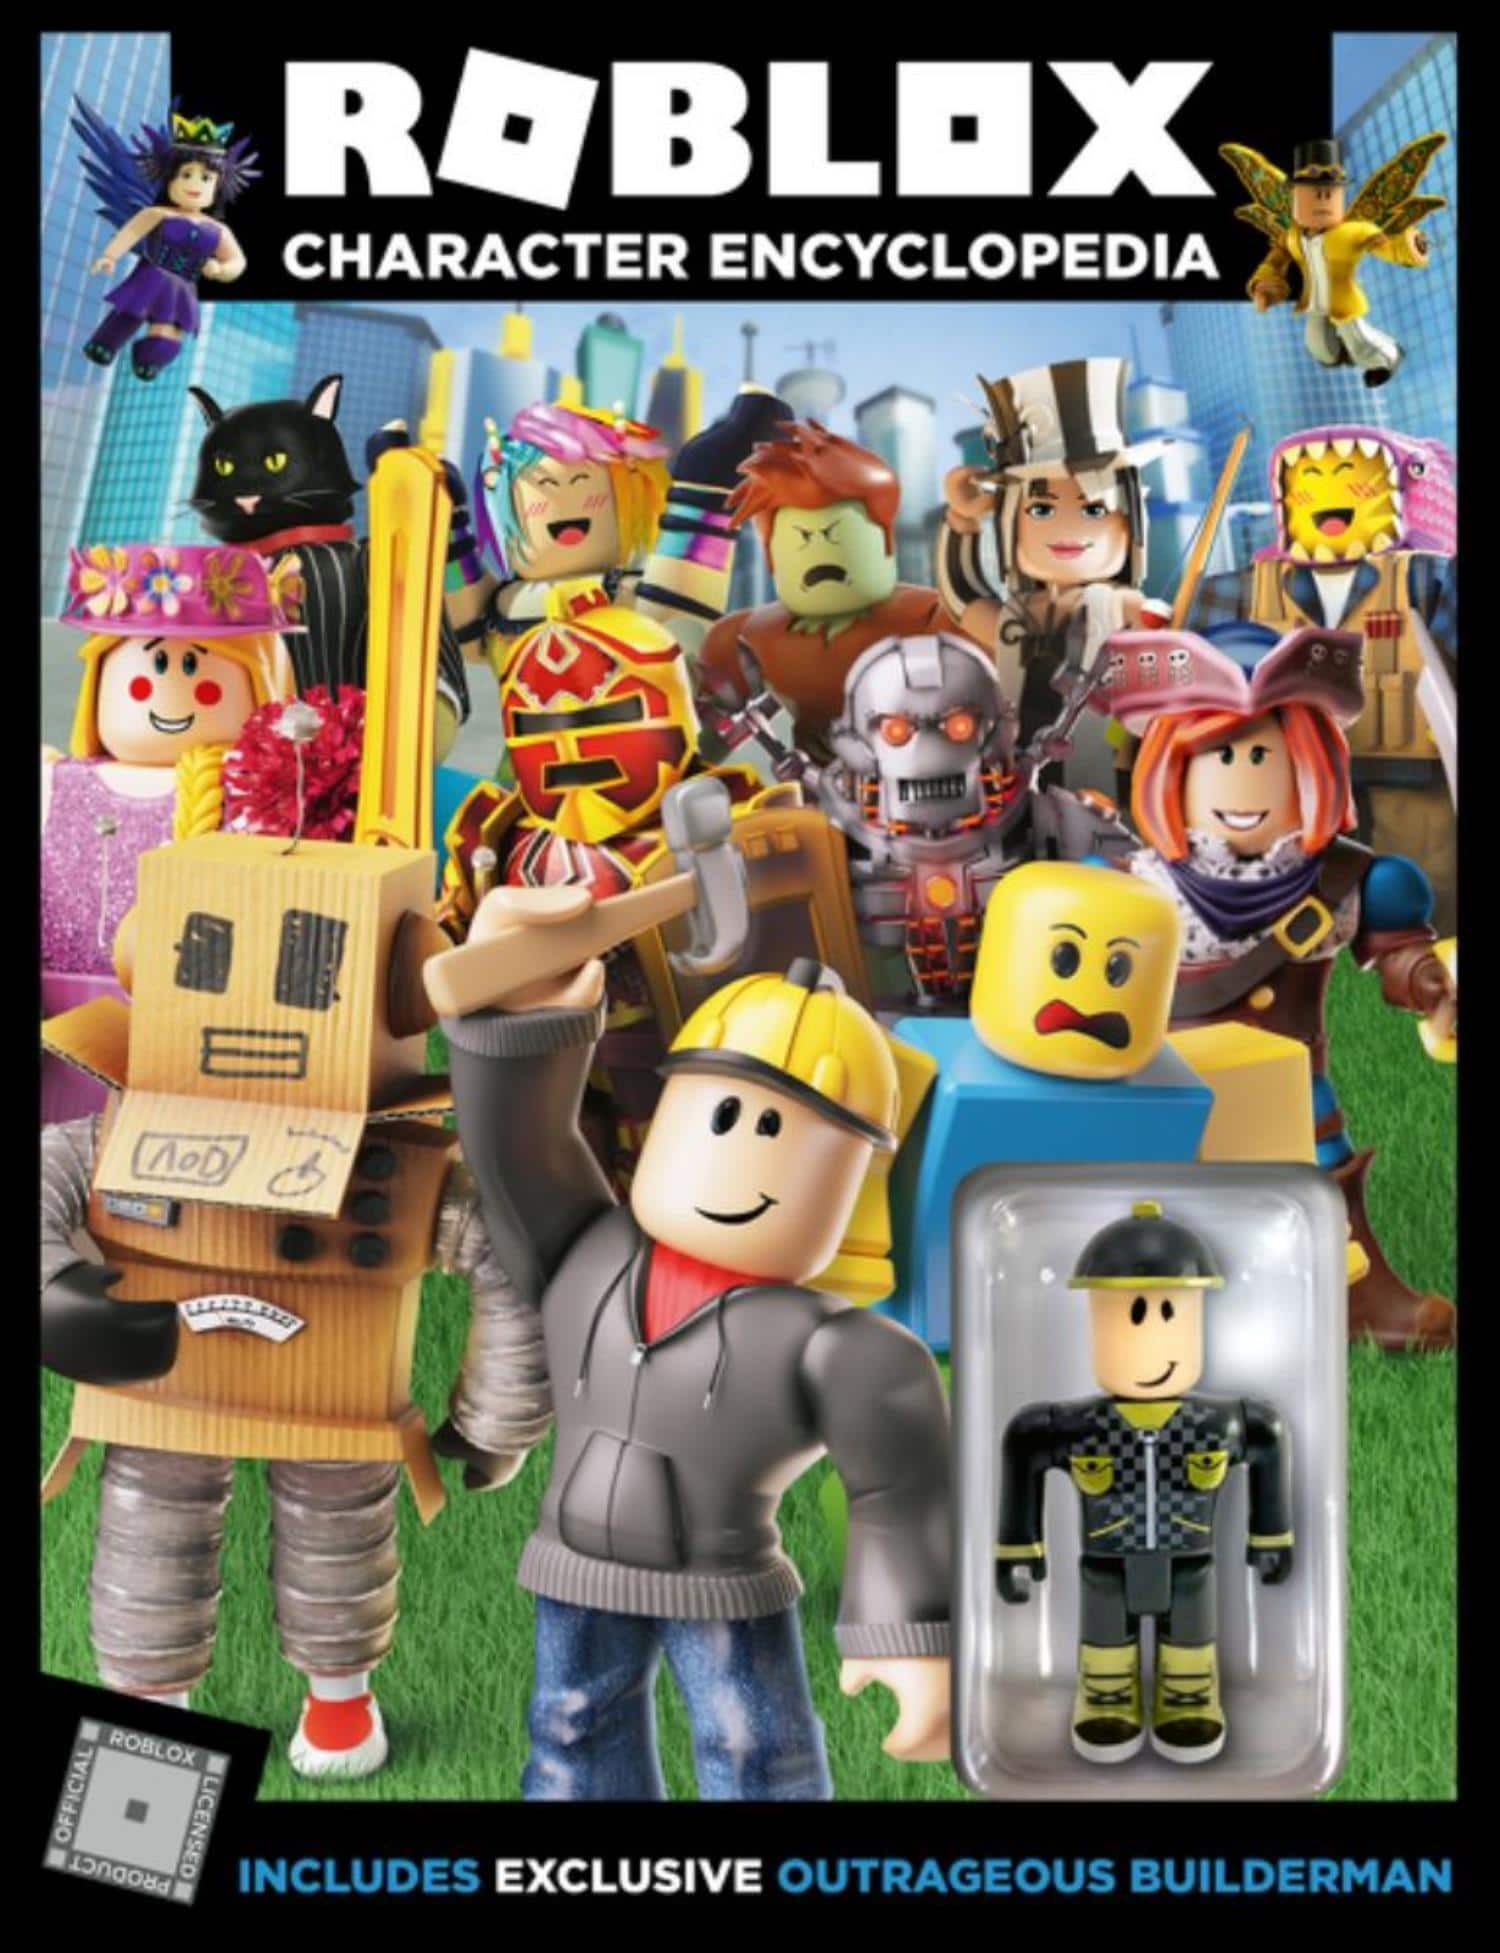 Purchase The Roblox Character Encyclopedia At Michaels - getting in shape for our wedding day roblox